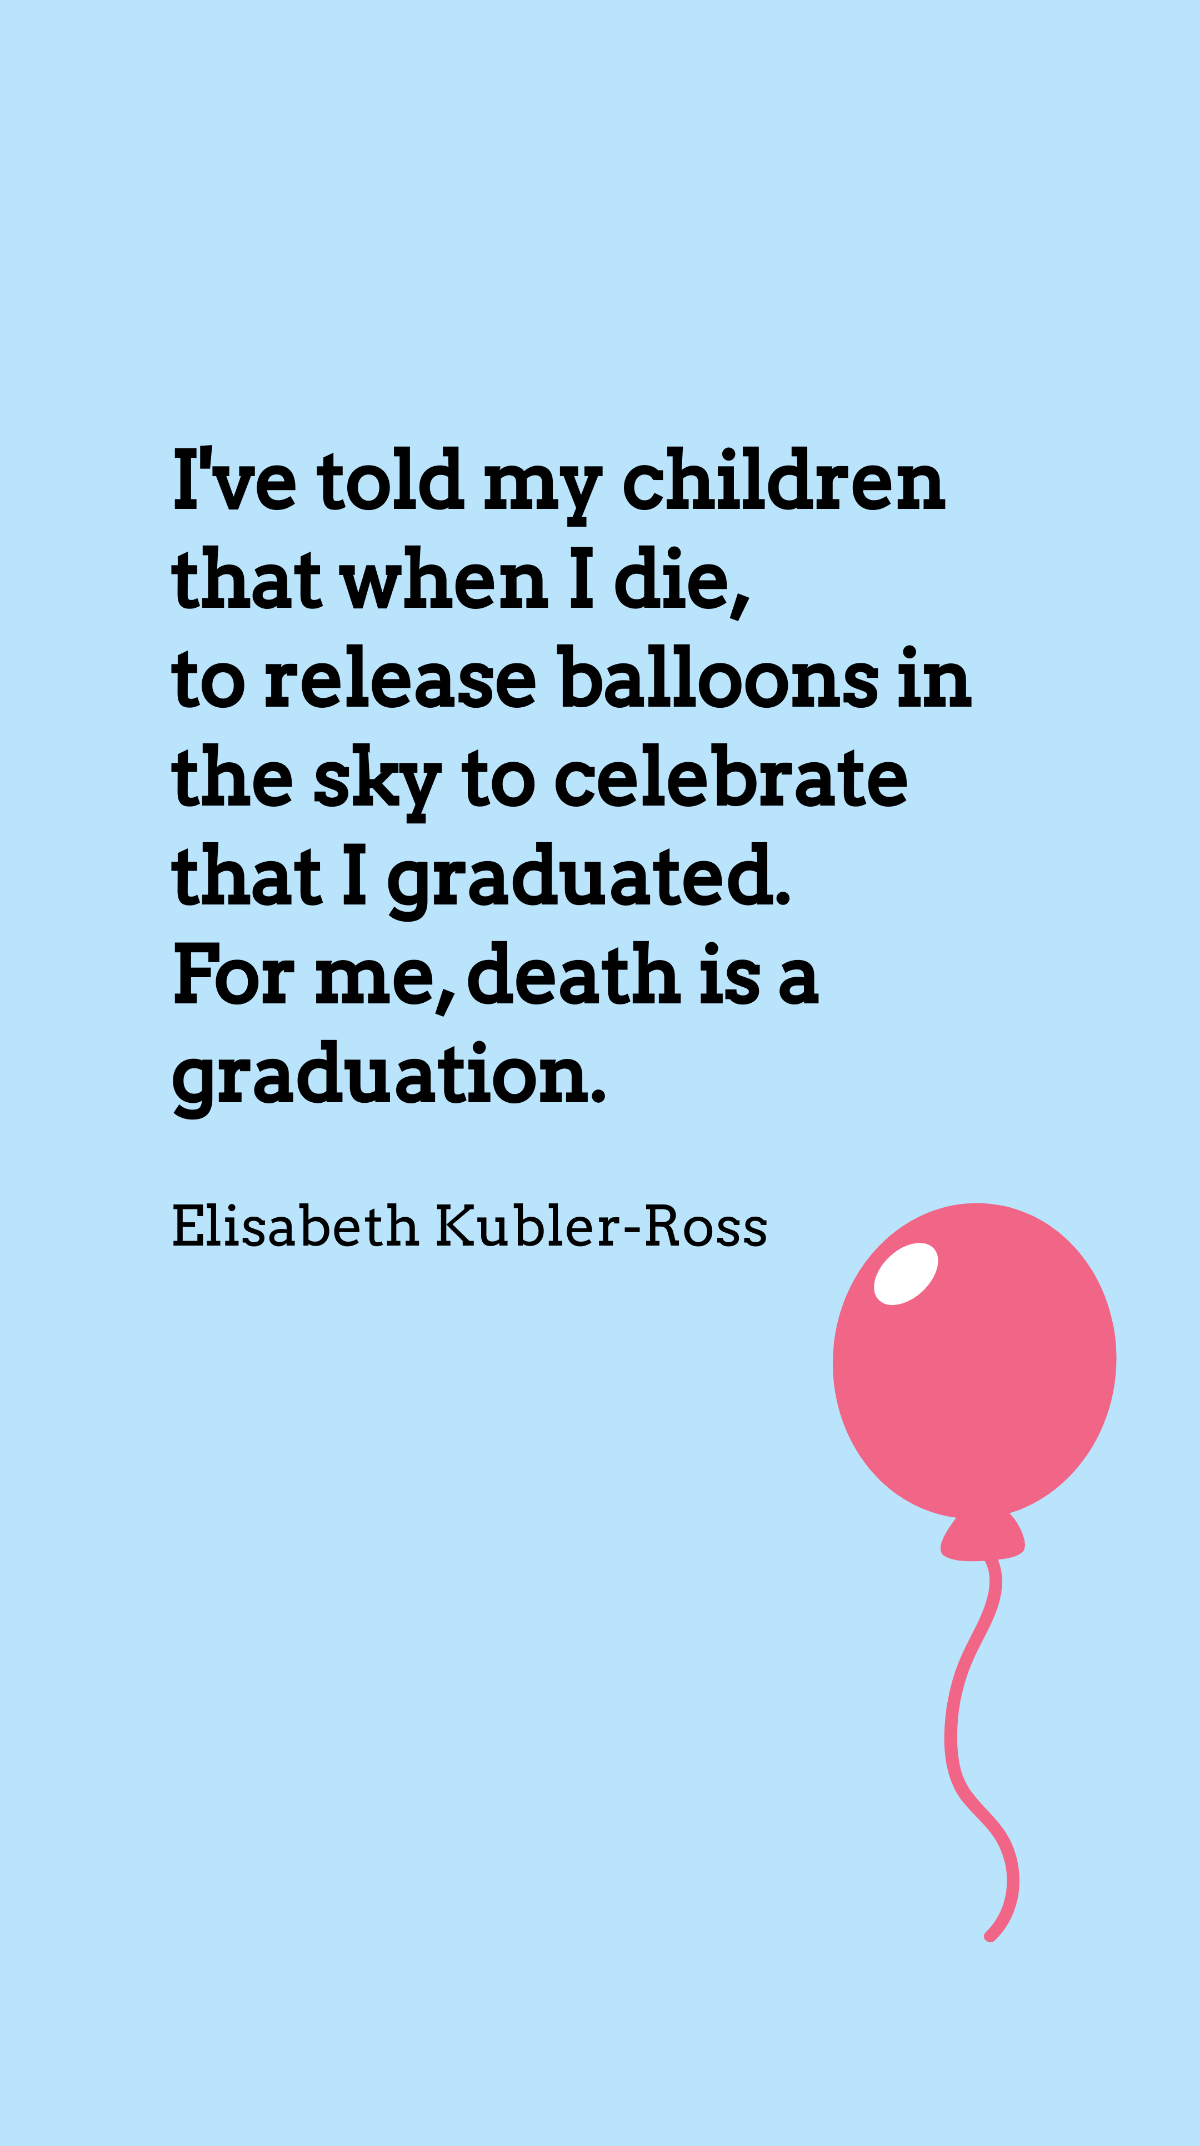 Elisabeth Kubler-Ross - I've told my children that when I die, to release balloons in the sky to celebrate that I graduated. For me, death is a graduation.